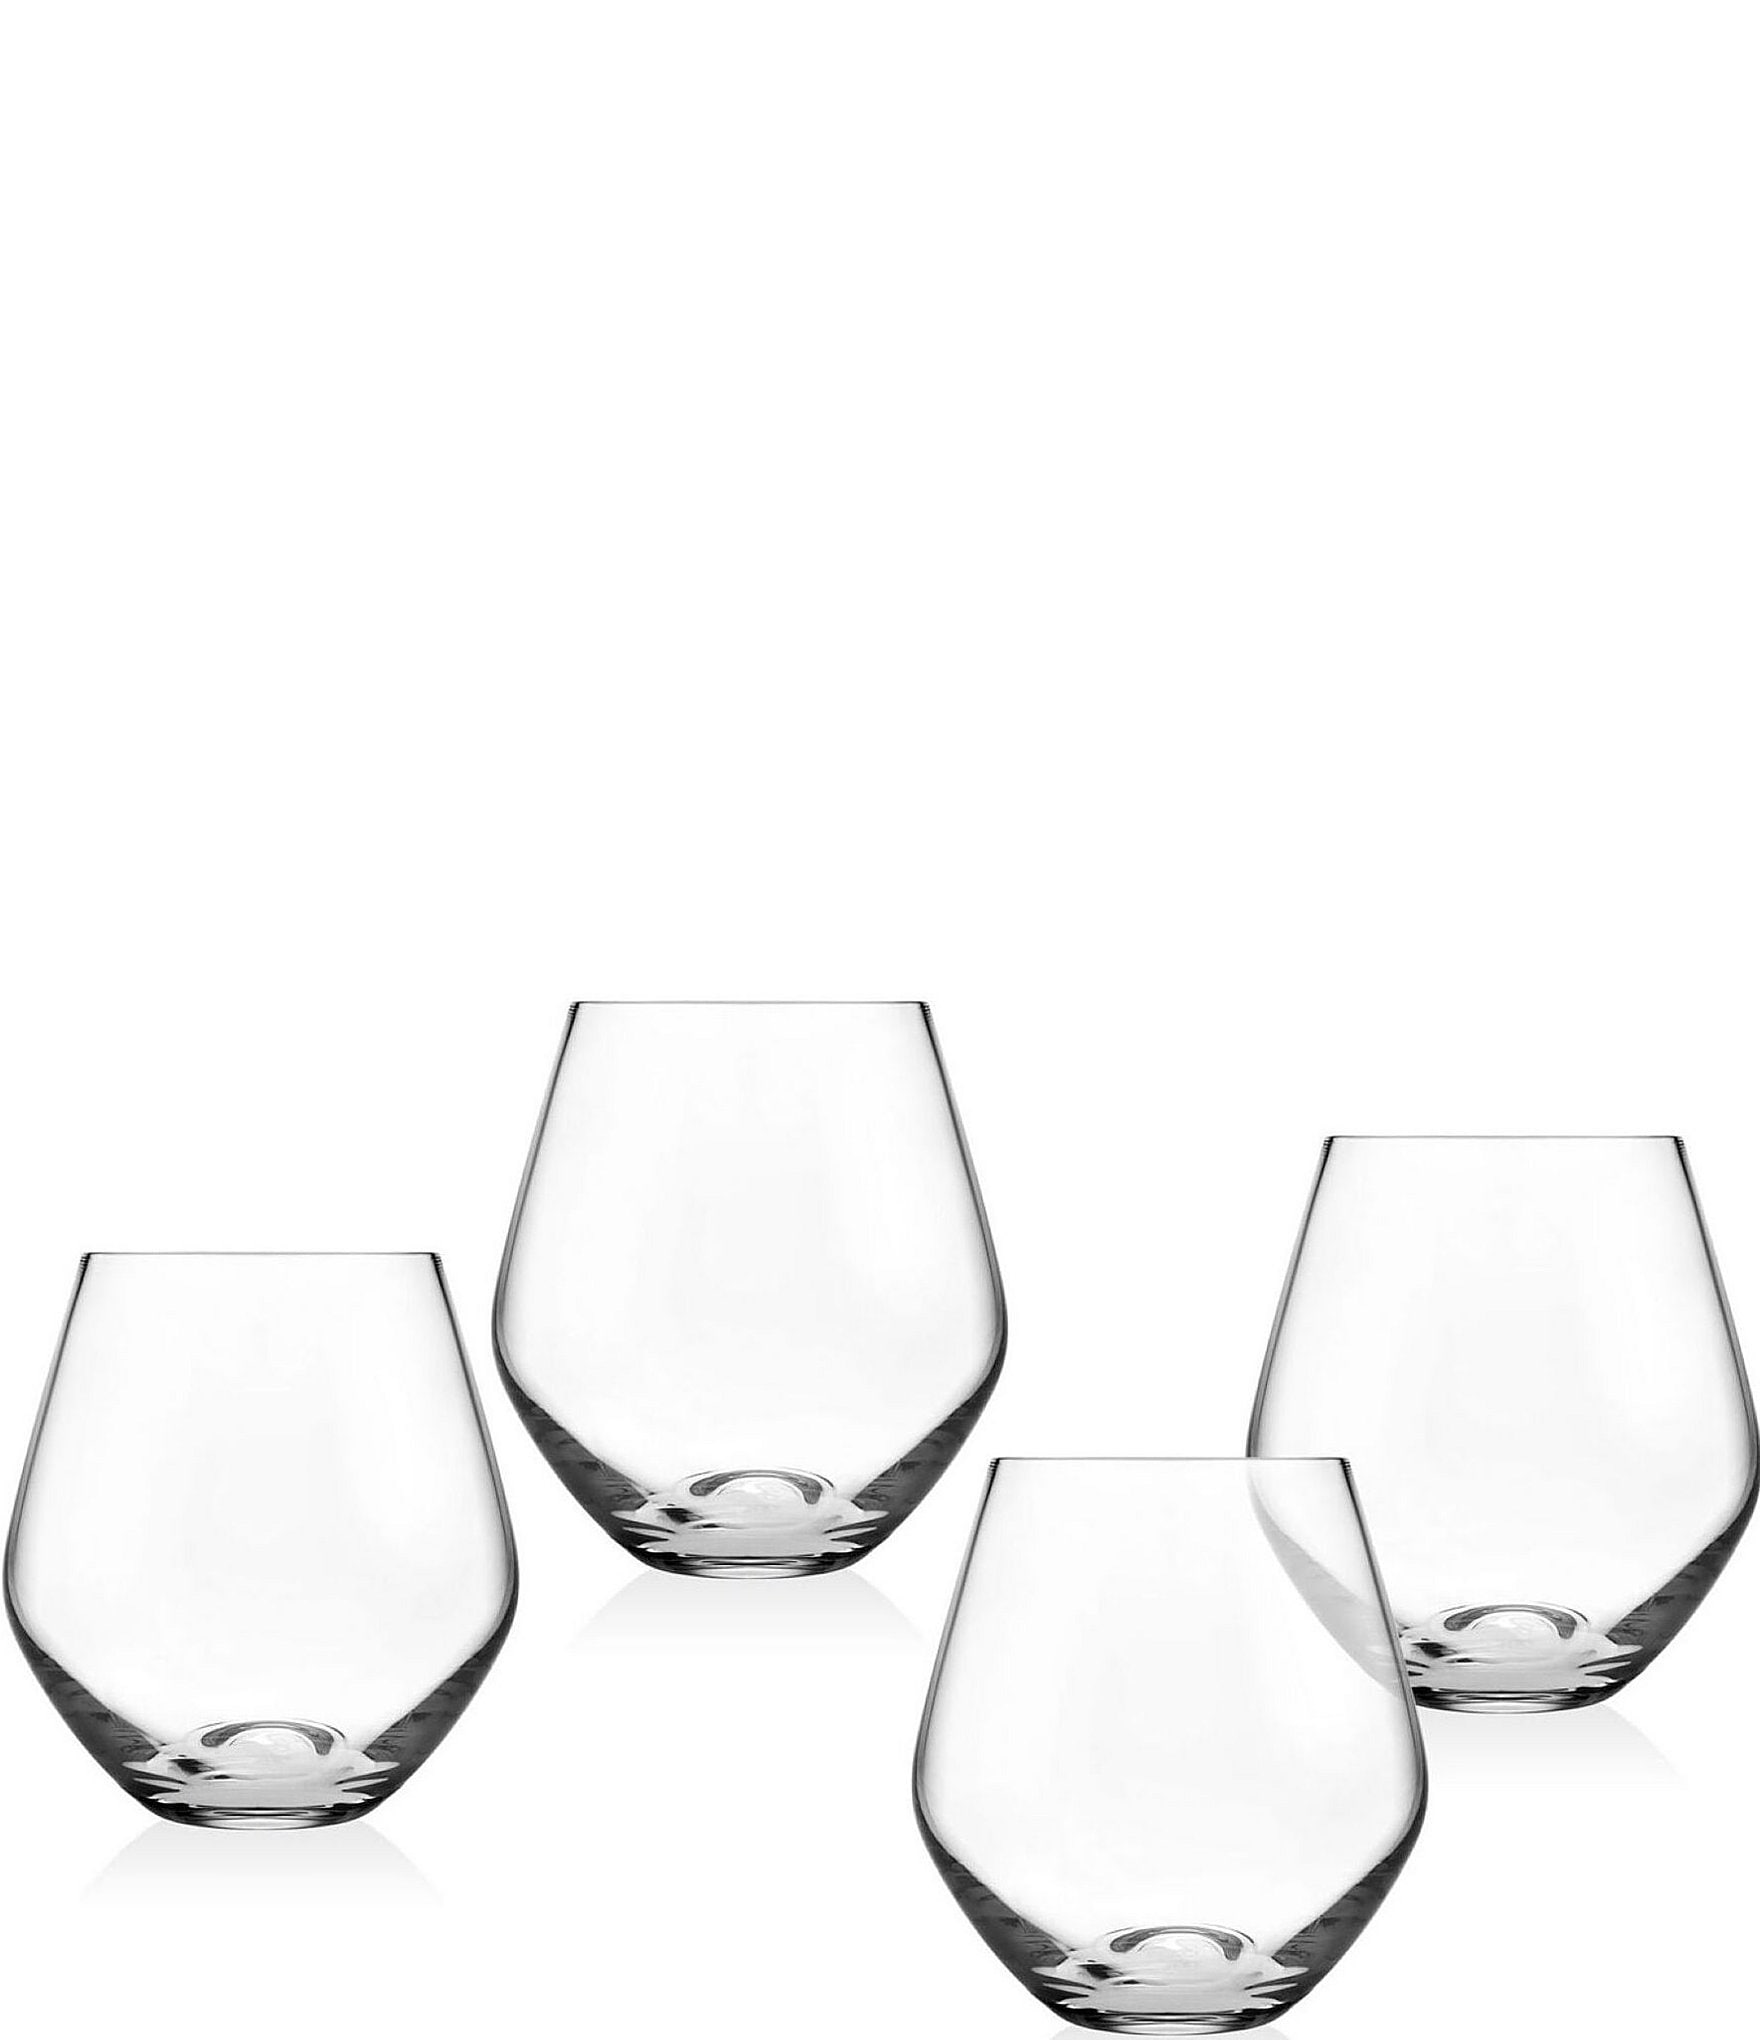 Harvard Stemless Wine Glasses - Set of 4 Made in the USA for M.LaHart & Co.